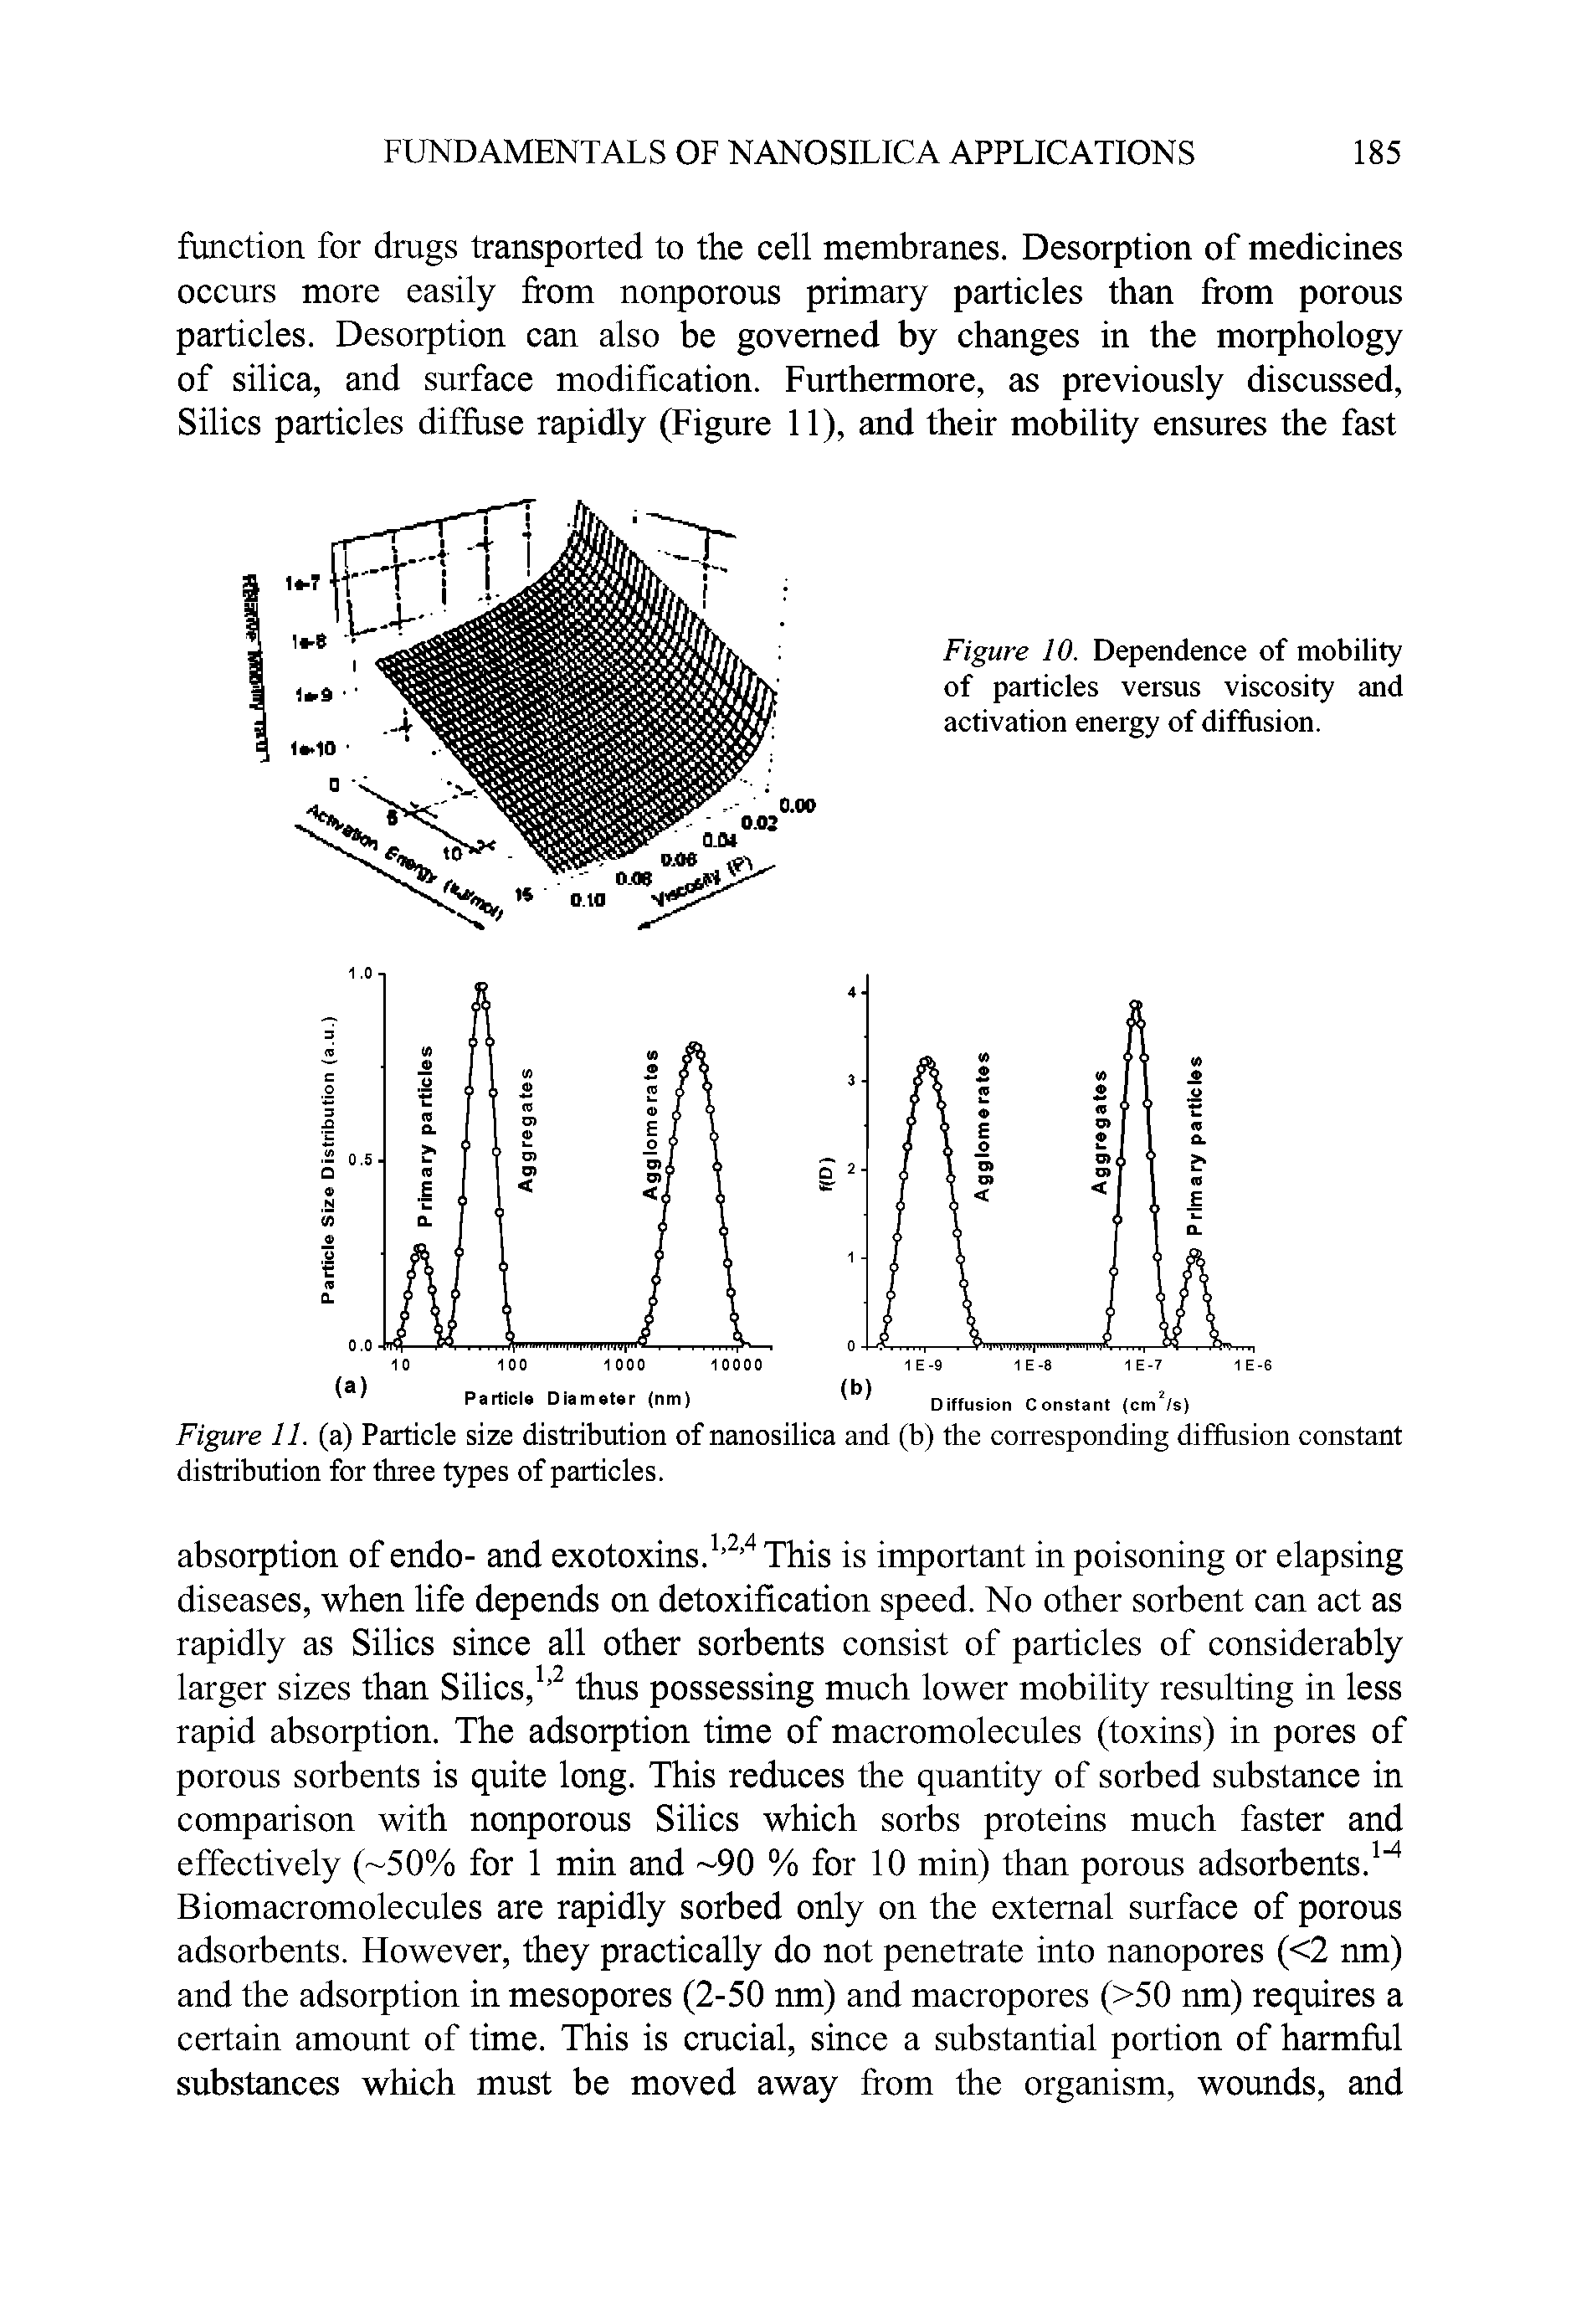 Figure 10. Dependence of mobility of particles versus viscosity and activation energy of diffusion.